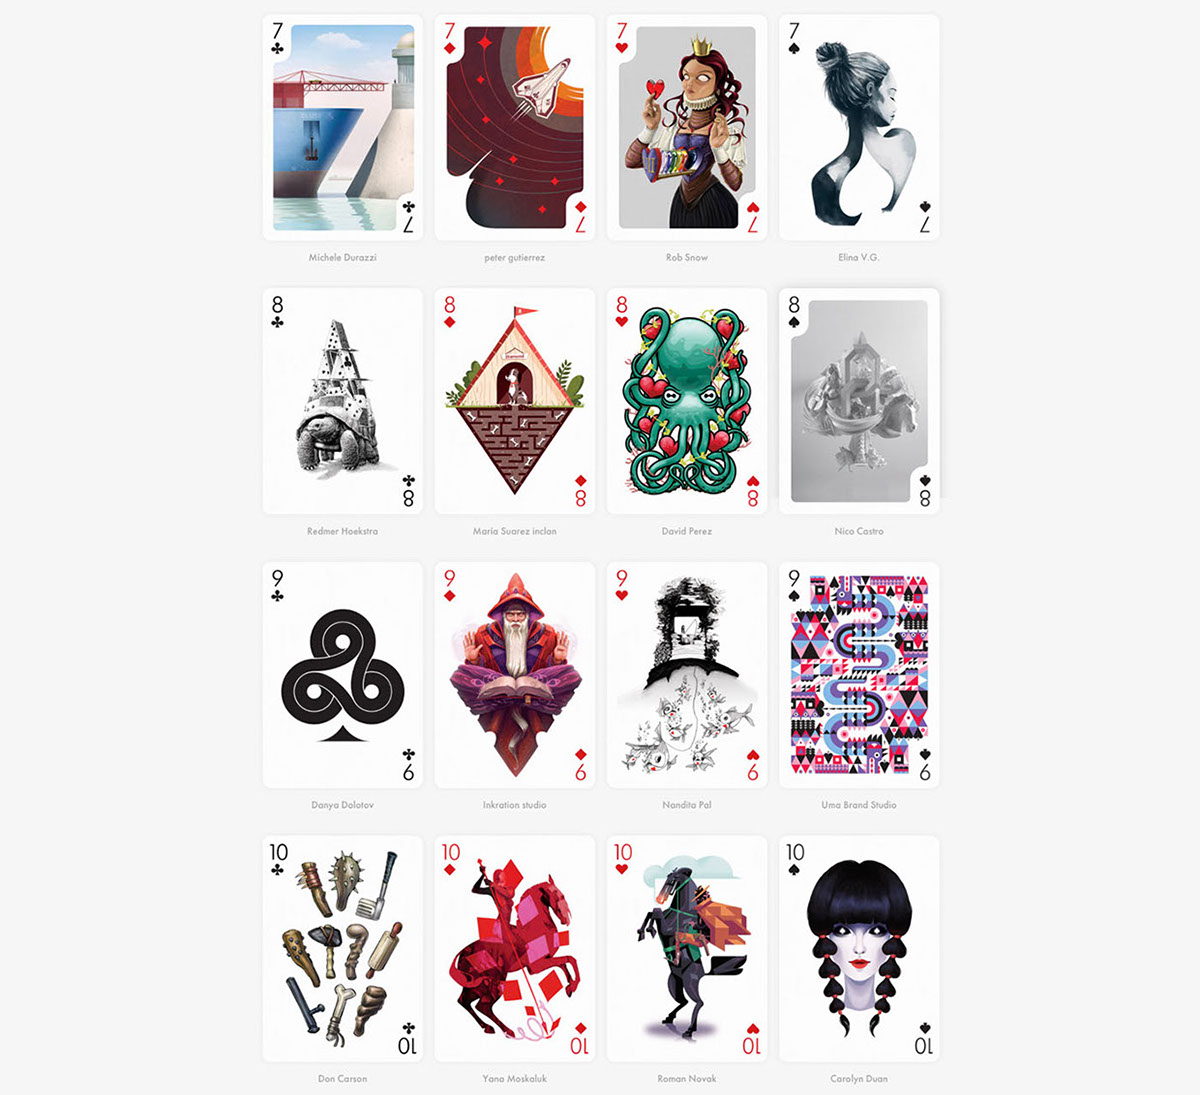 Playingartscontest PlayingArts 4ofHearts four escher hearts cards deck city